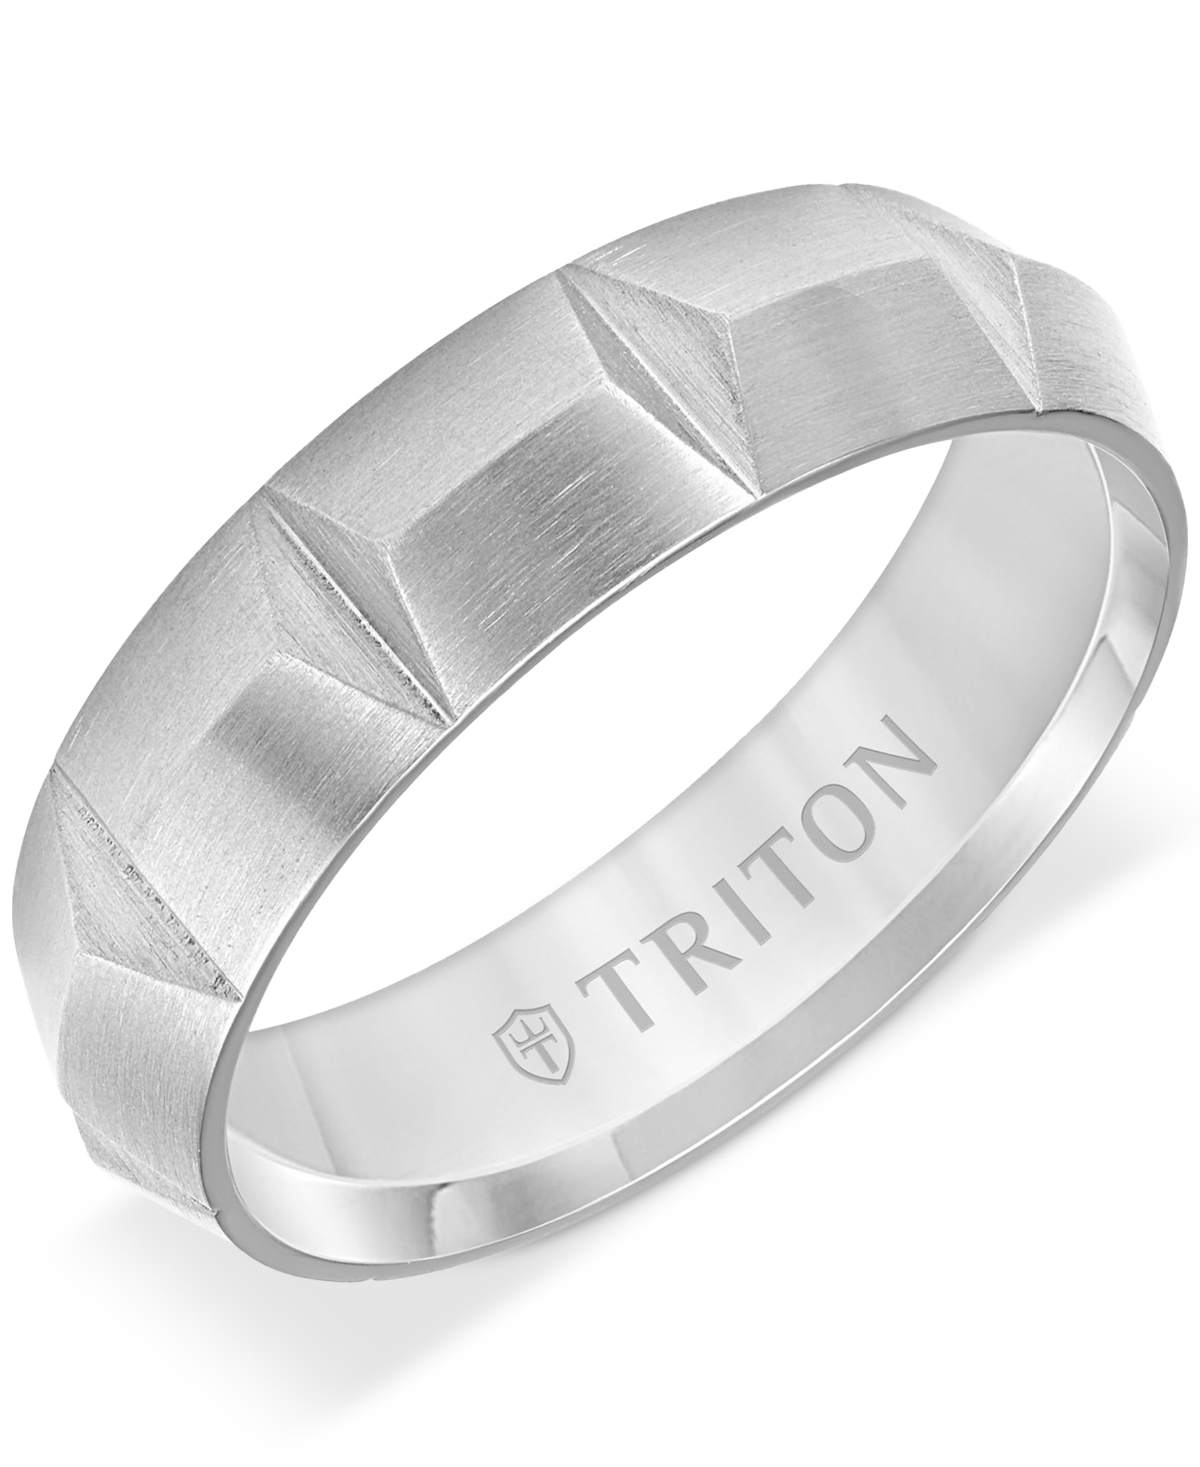 Men's Carved Comfort Fit Wedding Band in Gray Titanium - Gray